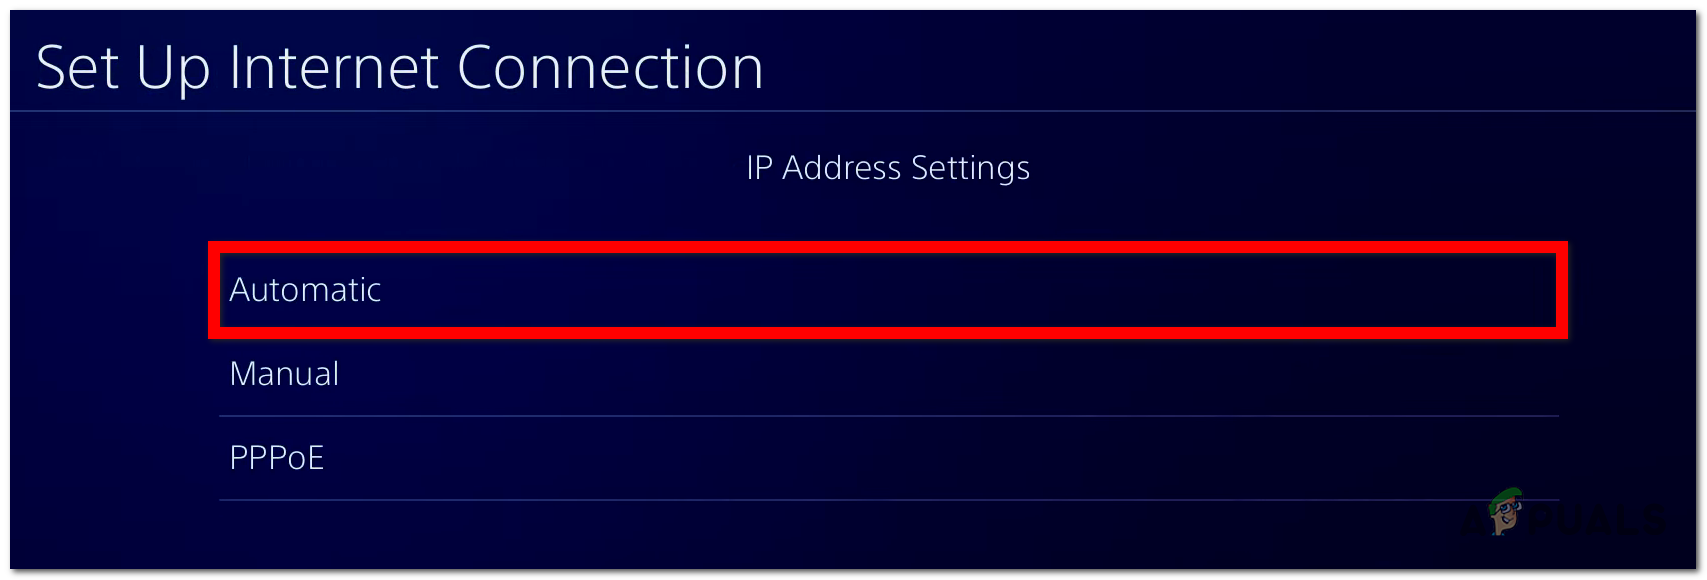 Settings the IP Address to Automatic